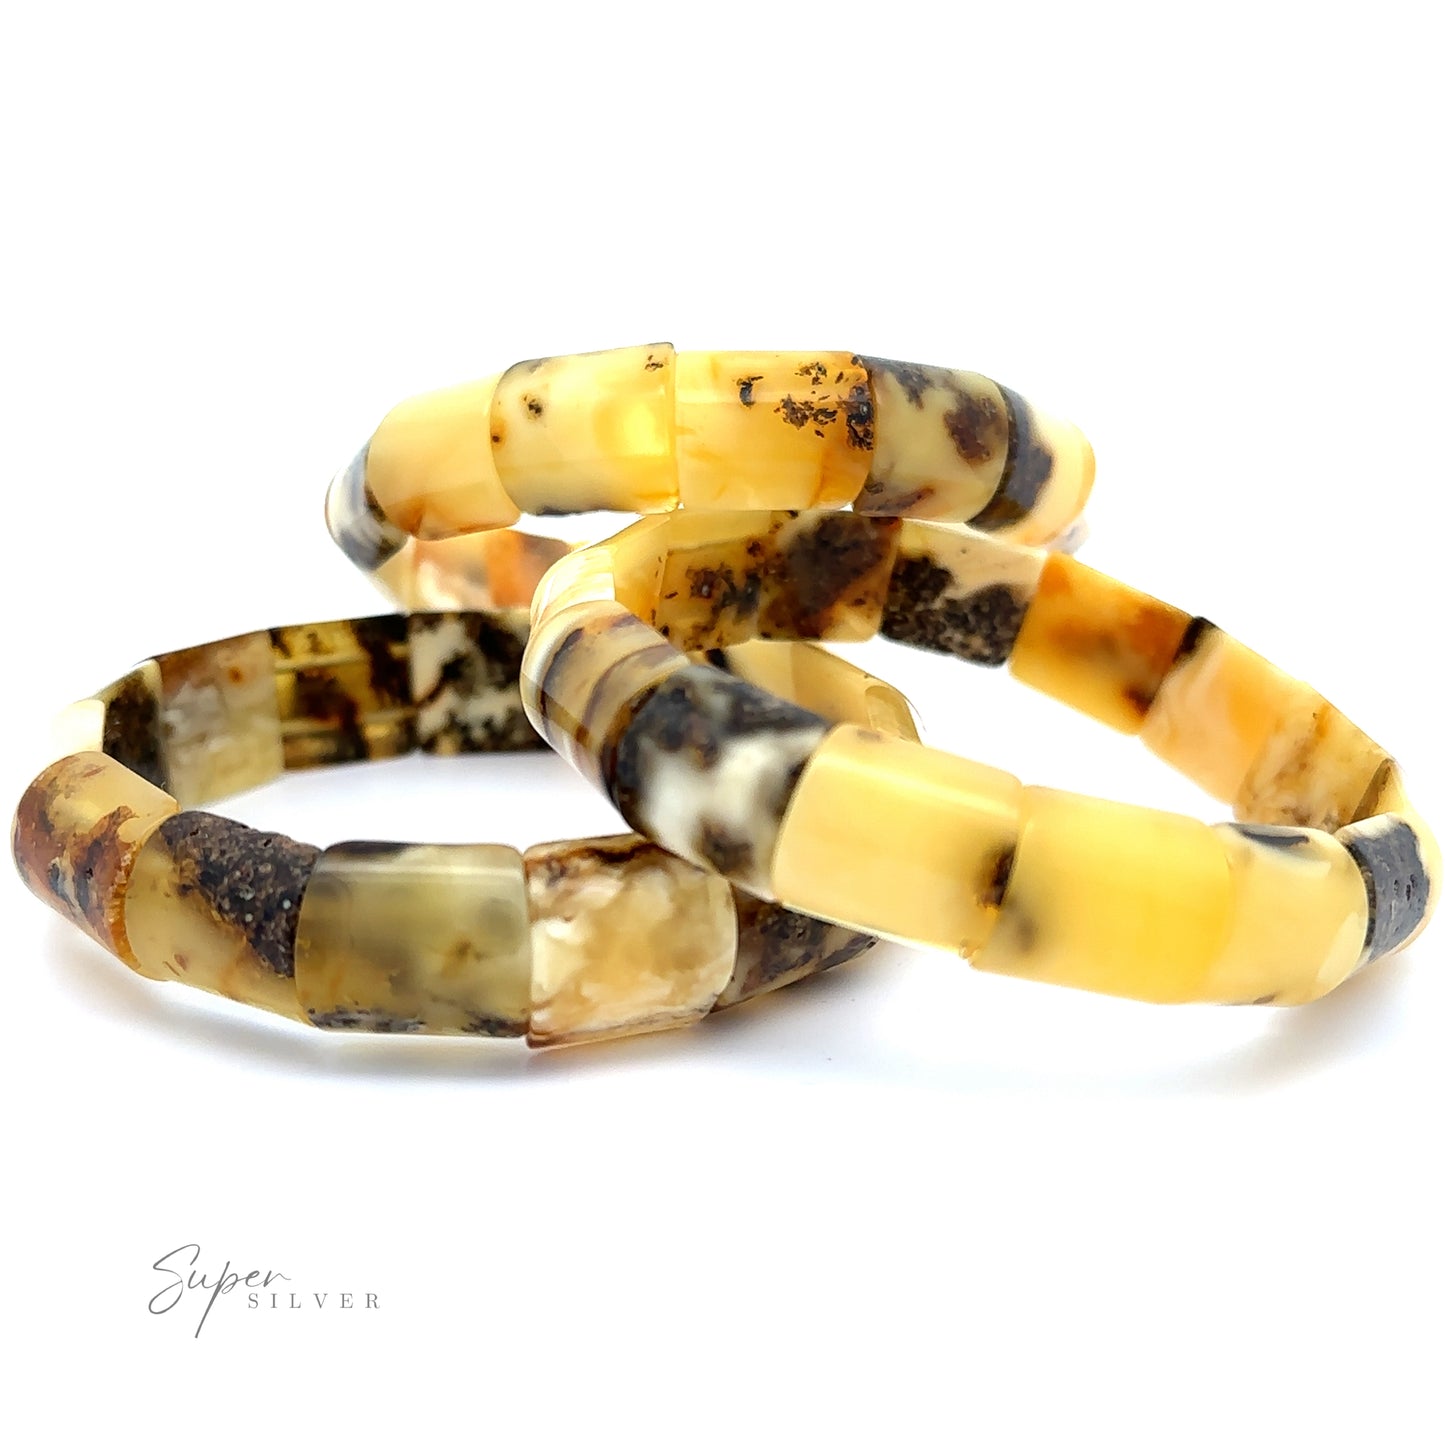 Three beige and brown stone bracelets with a marbled pattern are stacked on a white surface, resembling the elegant Brilliant Butterscotch Amber Stretch Bracelet style. The text "Super Silver" is visible in the lower-left corner.